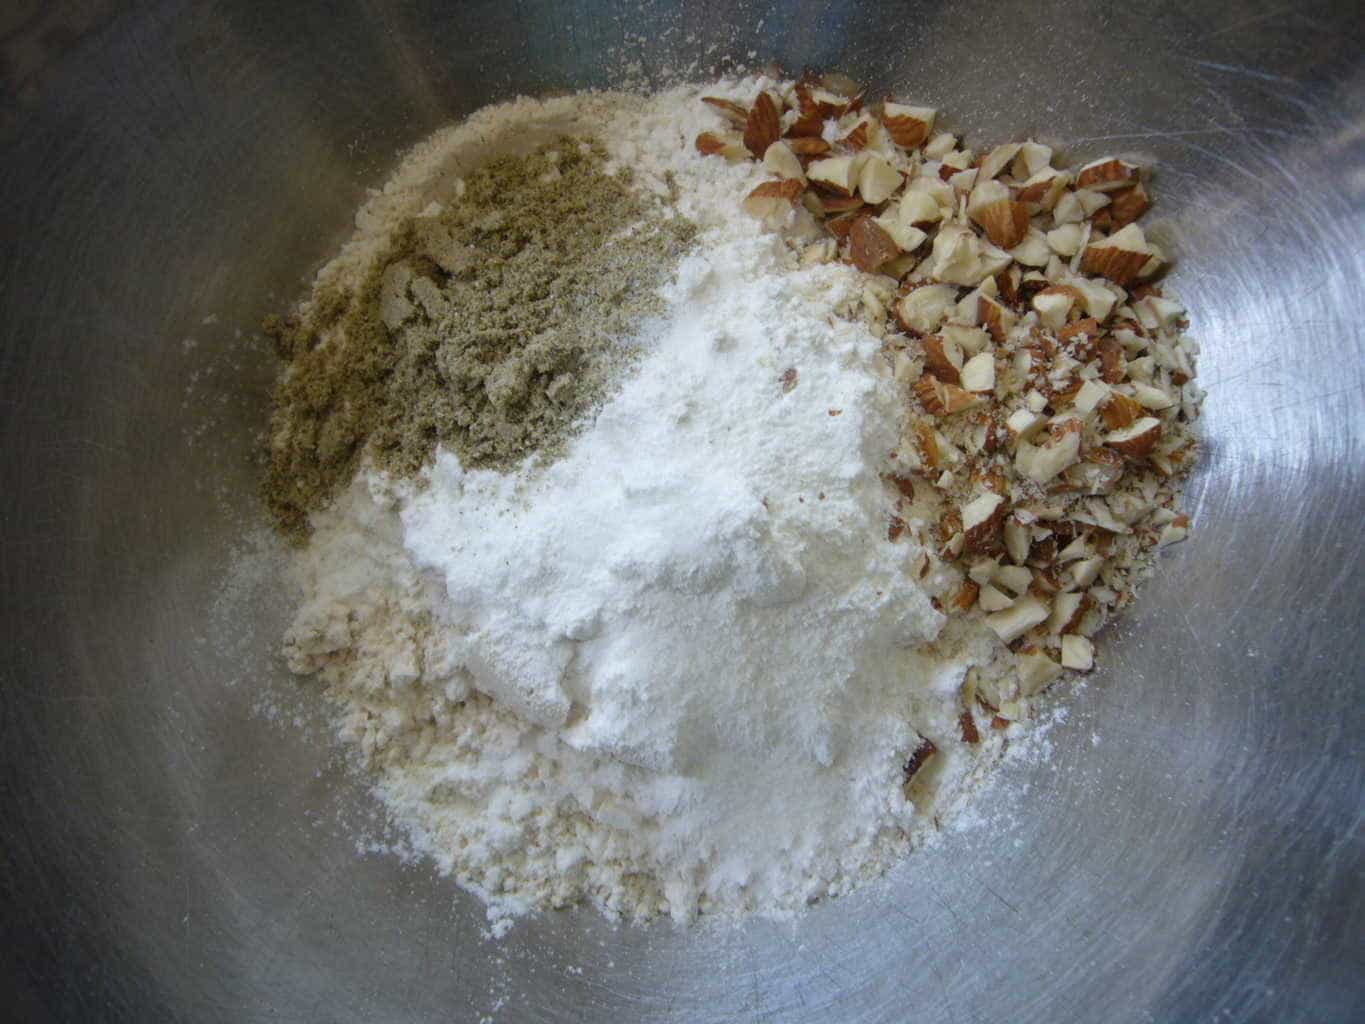 The dry ingredients used for making pancakes with carrots.